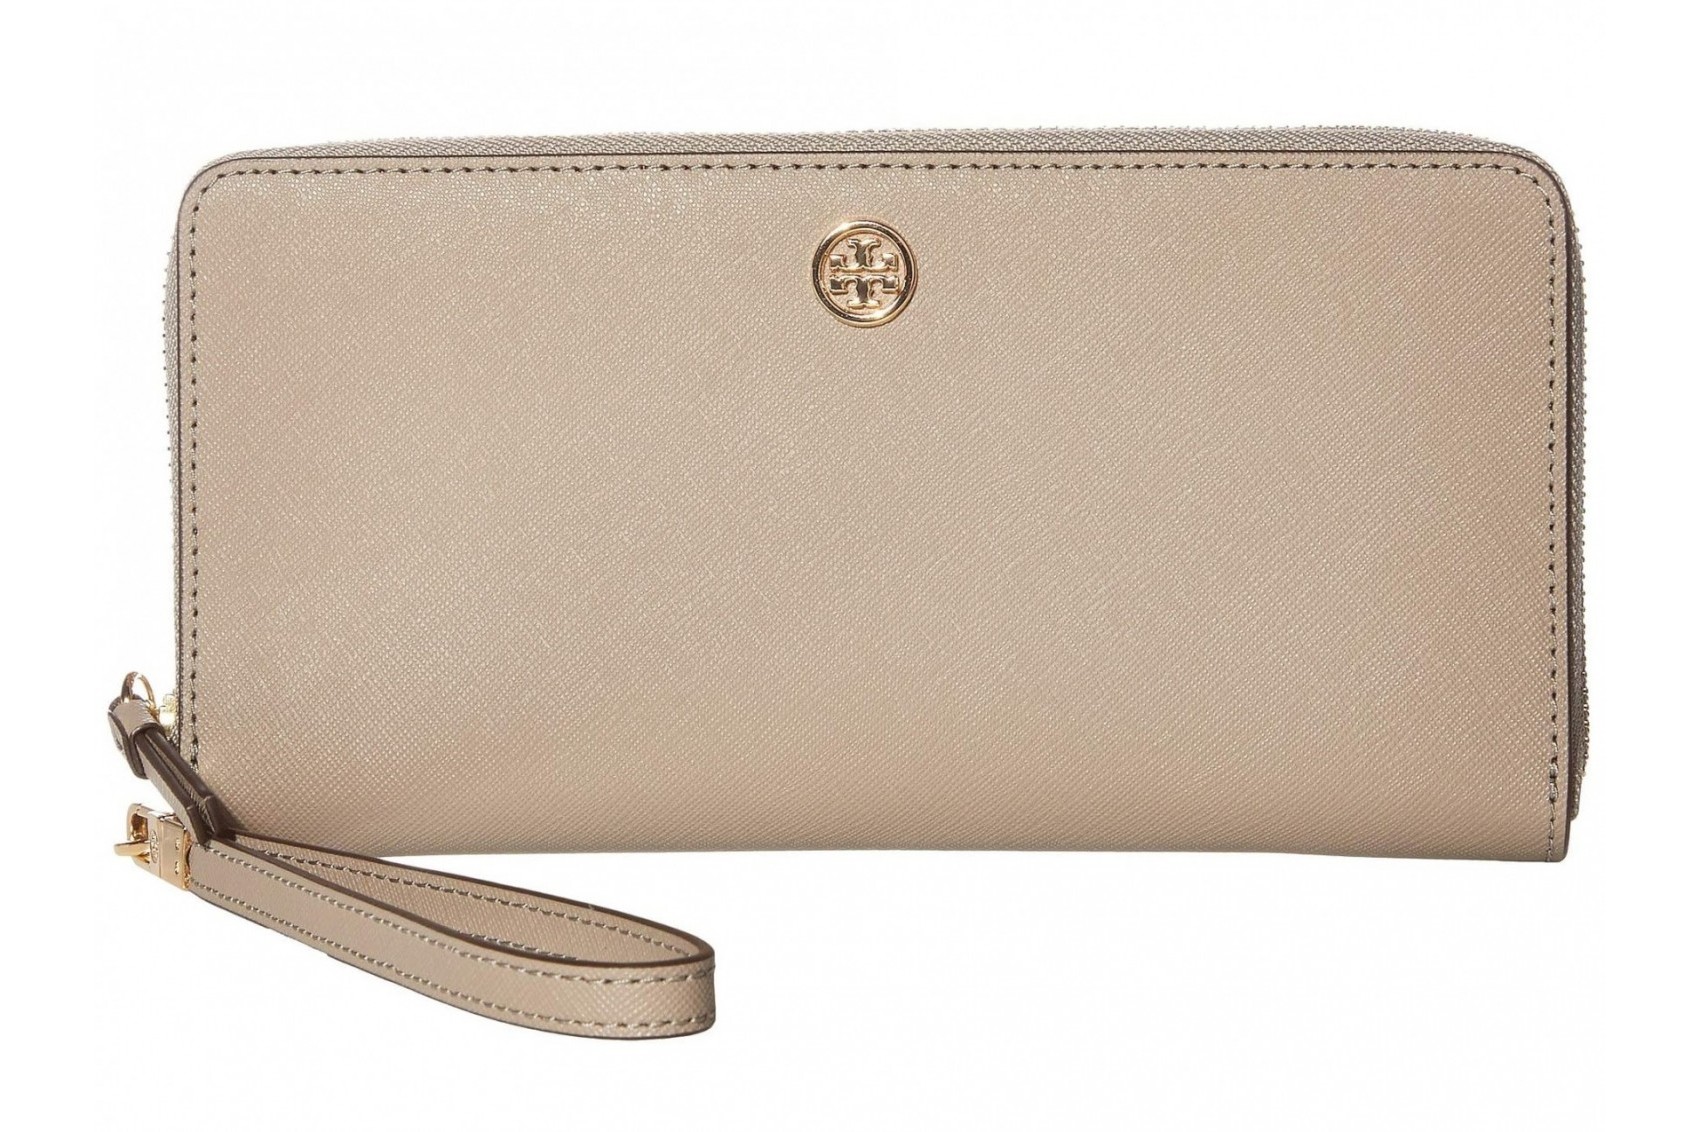 Tory Burch Miller Phone Crossbody In Feather Gray | ModeSens